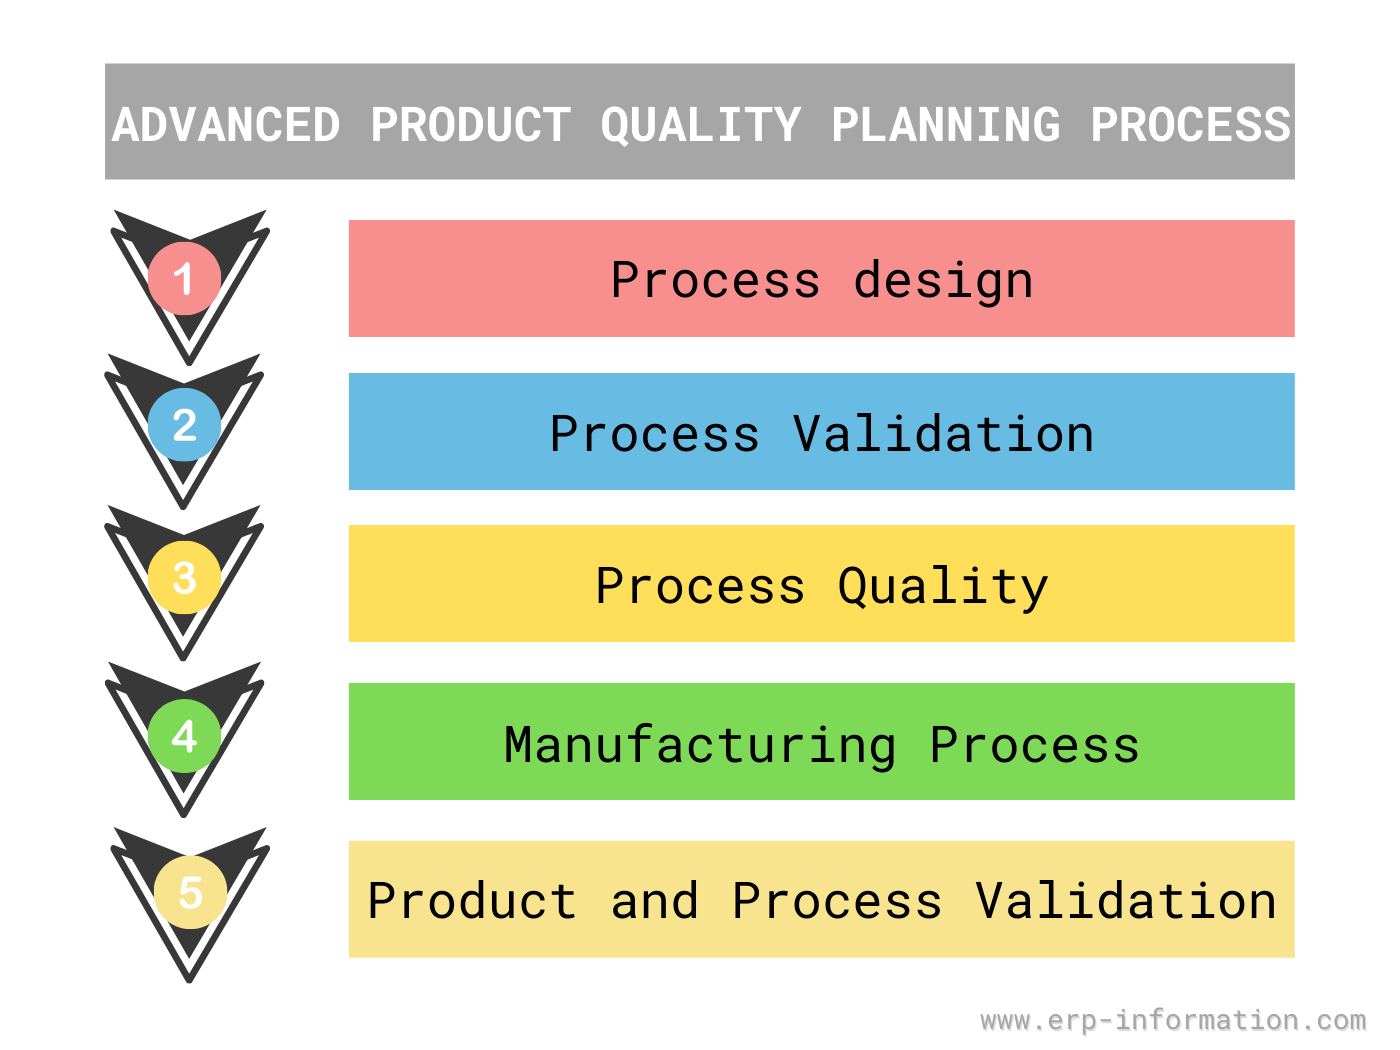 Apqp Advanced Product Quality Planning Phases Of Apqp Core | Sexiz Pix